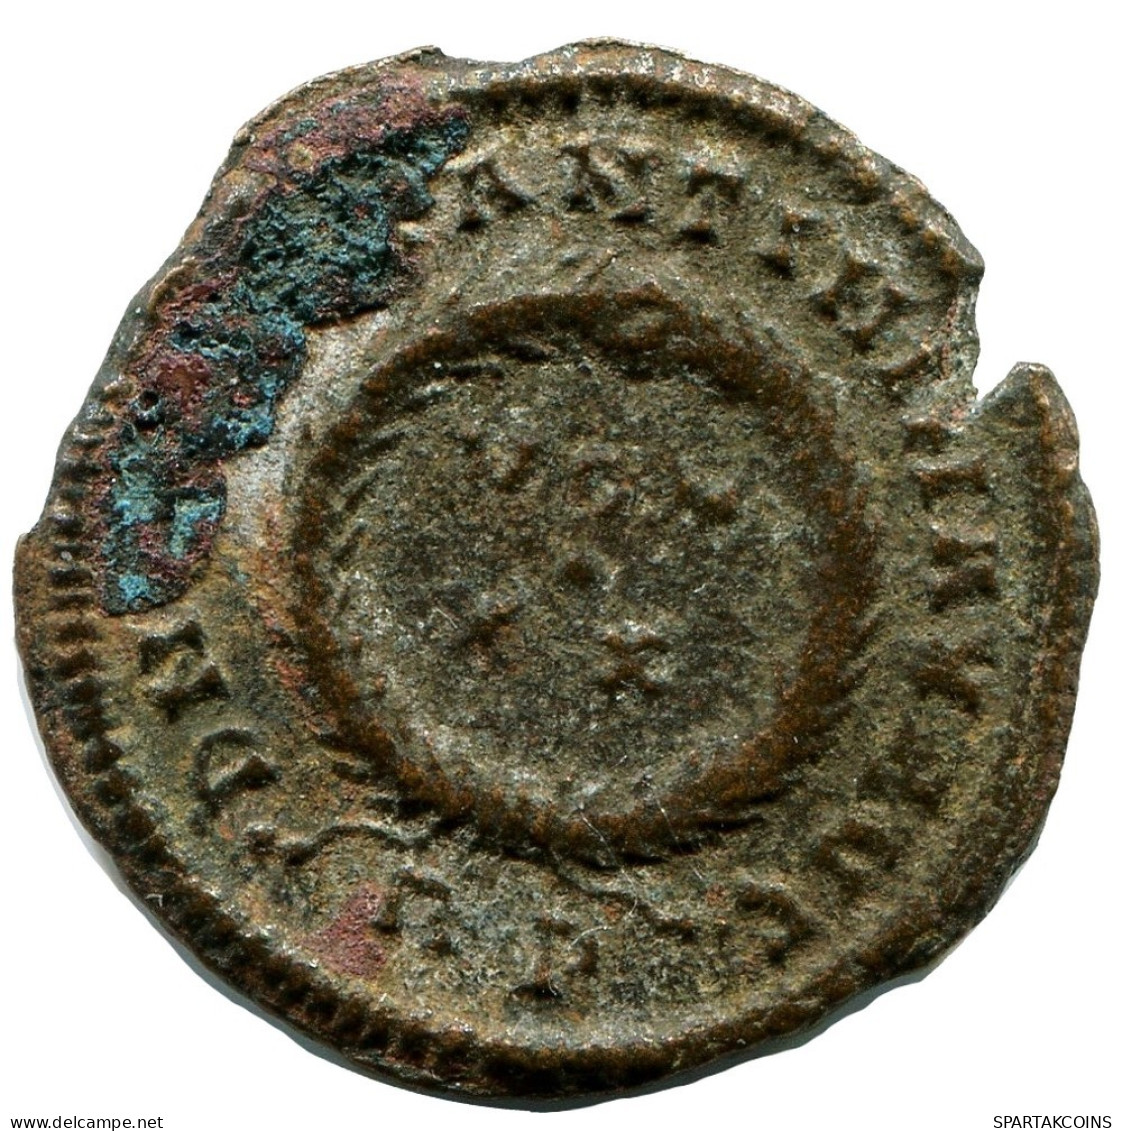 CONSTANTINE I MINTED IN ROME ITALY FOUND IN IHNASYAH HOARD EGYPT #ANC11175.14.D.A - The Christian Empire (307 AD Tot 363 AD)